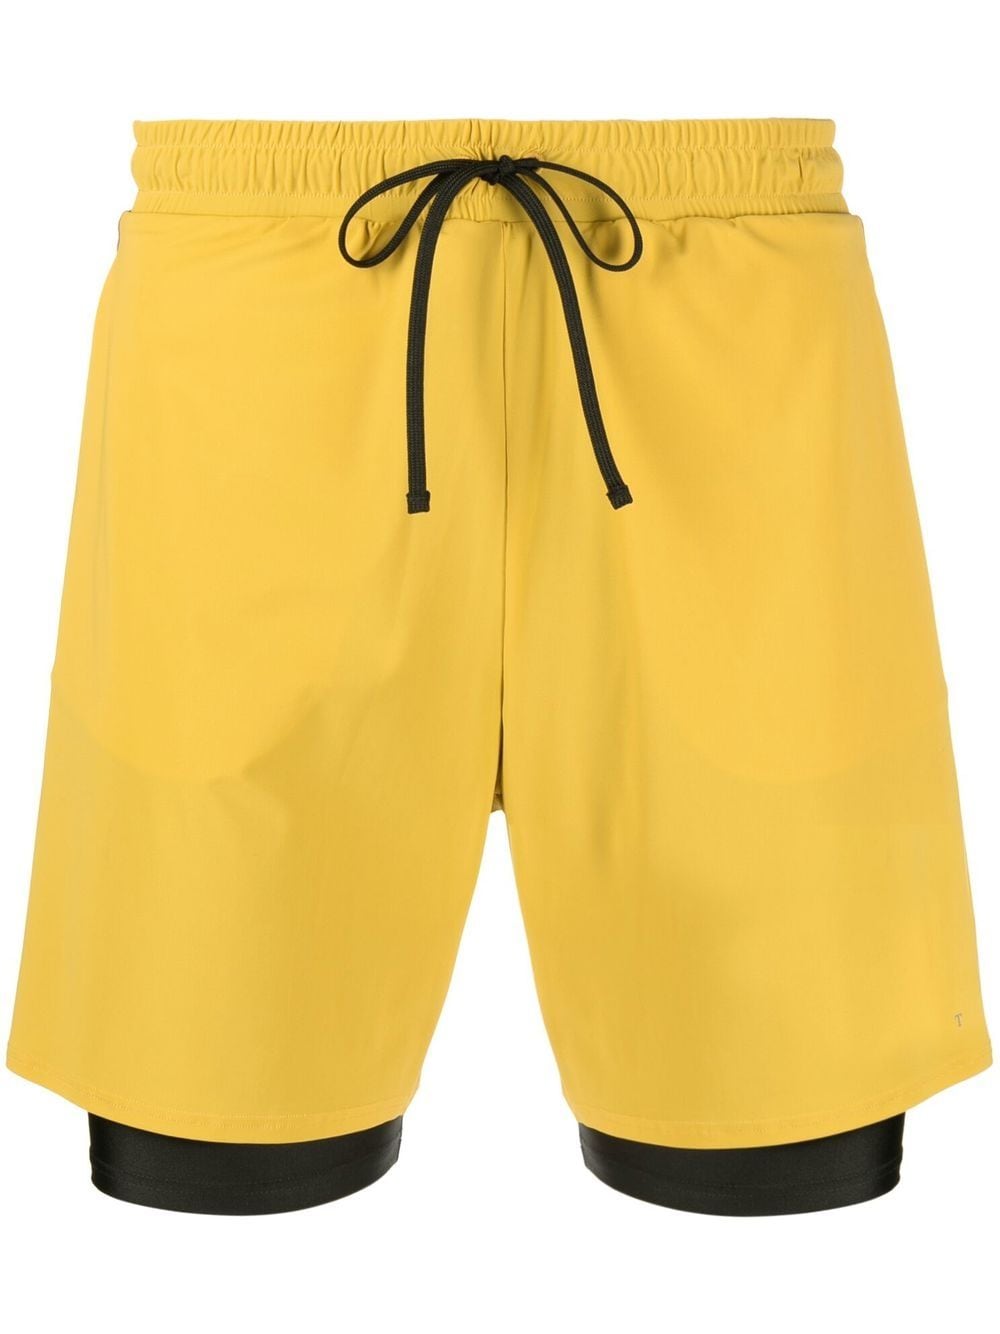 There Was One double-layered running shorts - Yellow von There Was One